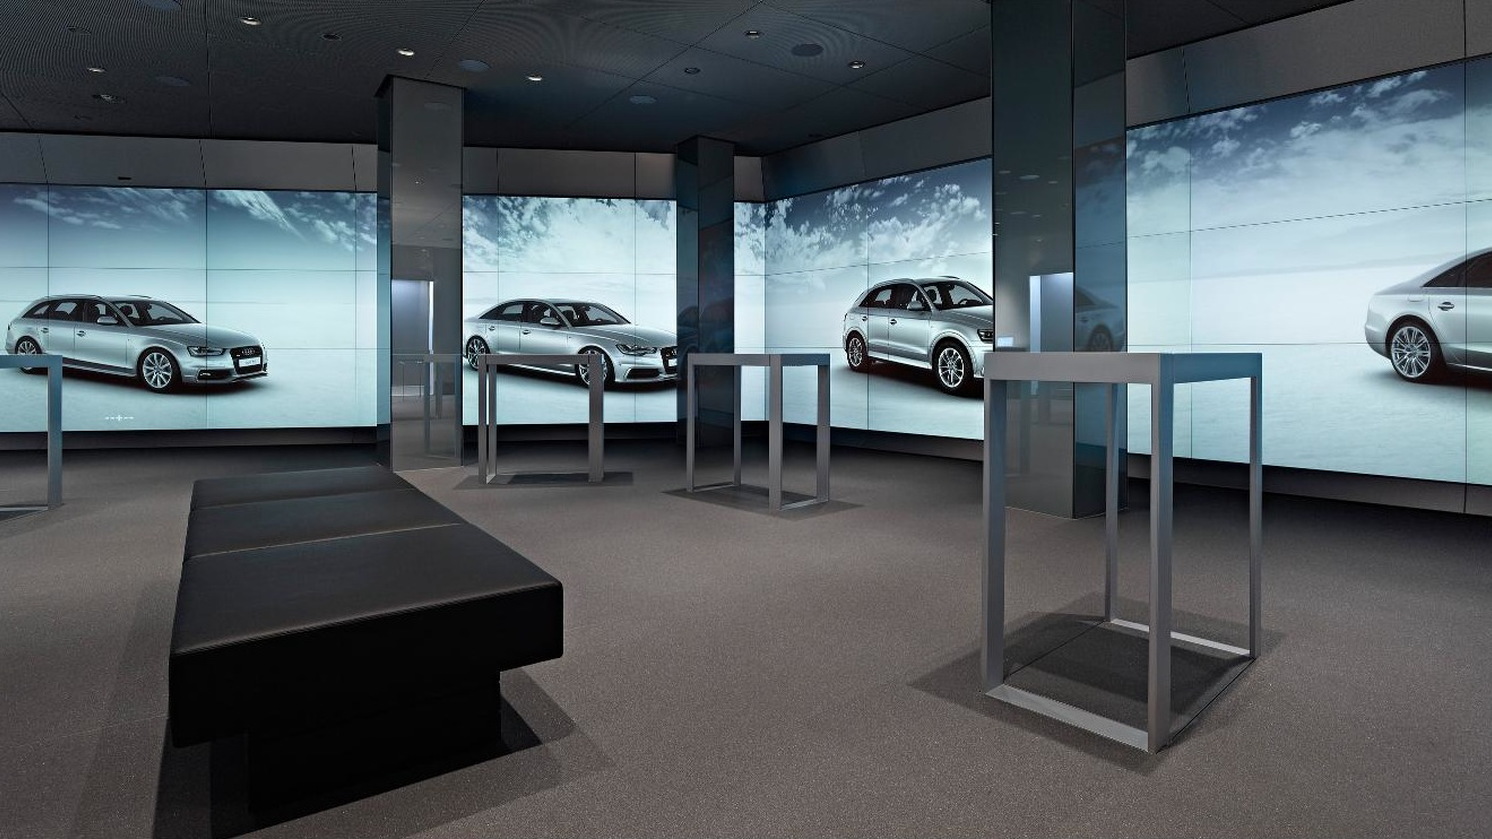 Audi City, opening in Central London